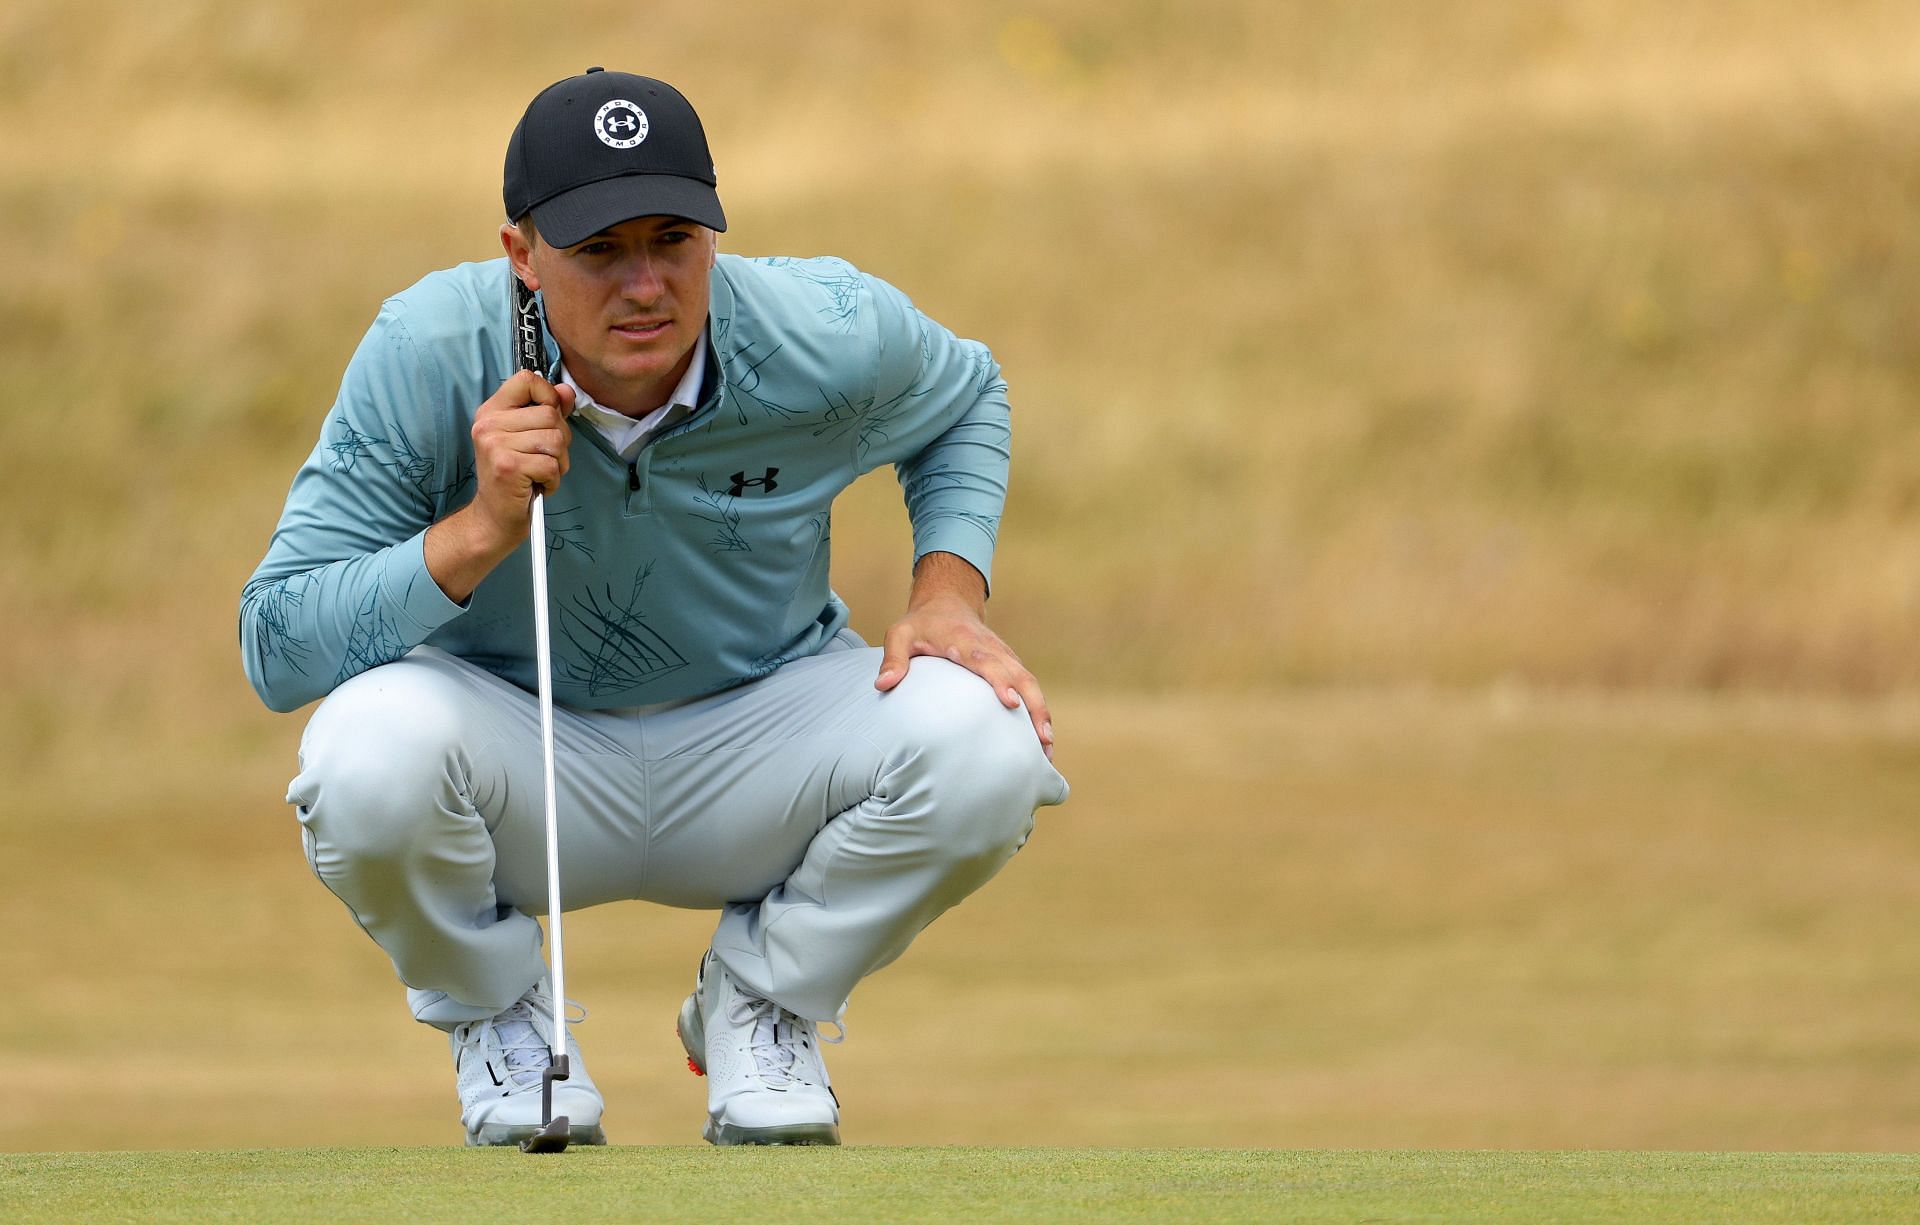 5 interesting things you likely did not know about Jordan Spieth